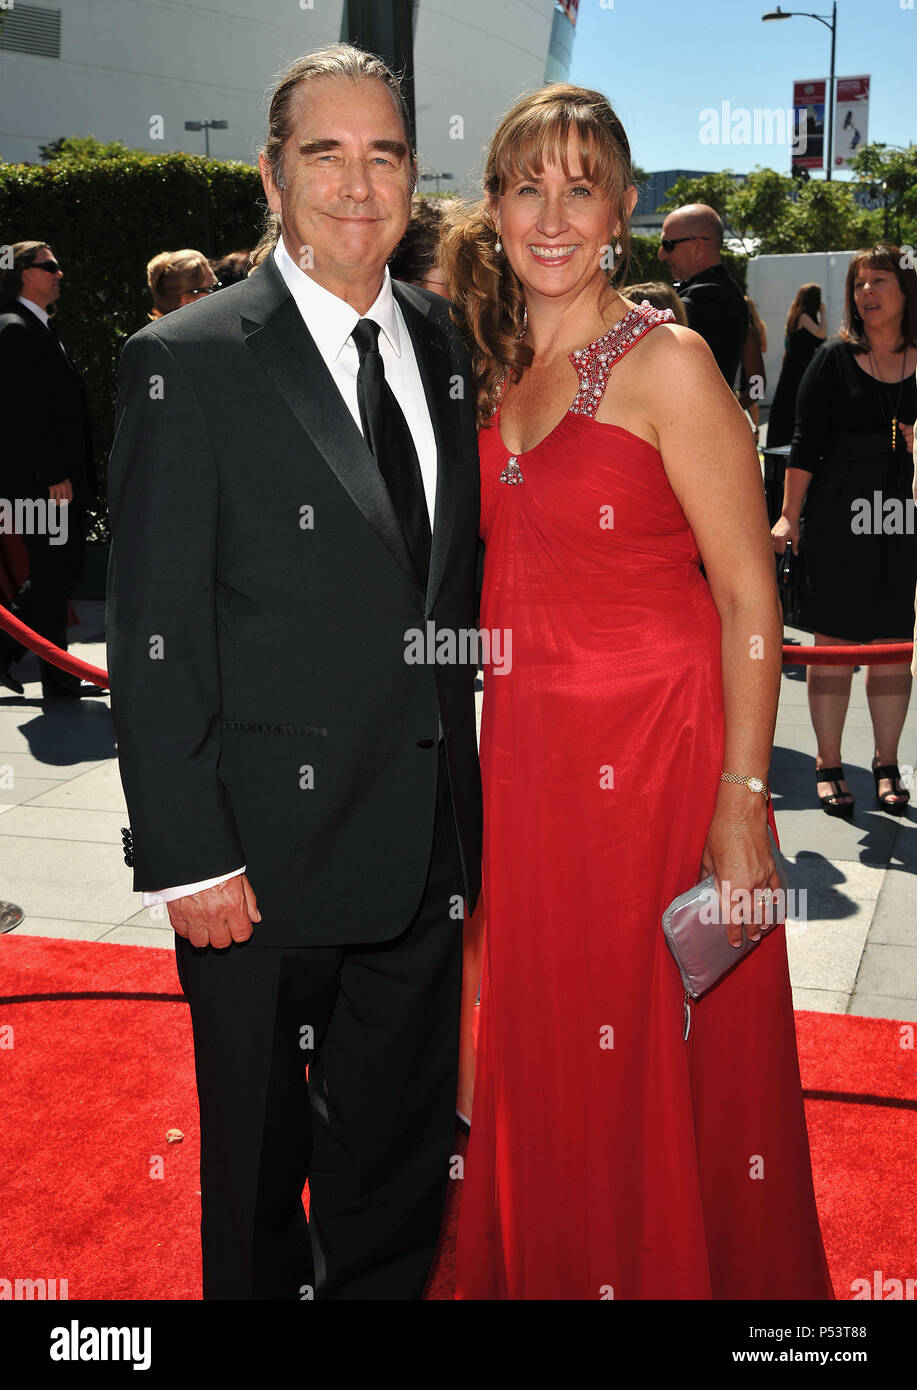 Beau Bridges and wife Wendy 2010 Creative Emmy Awards at the Nokia Theatre In Los Angeles.a BeauBridges Wendy 06  Event in Hollywood Life - California, Red Carpet Event, USA, Film Industry, Celebrities, Photography, Bestof, Arts Culture and Entertainment, Celebrities fashion, Best of, Hollywood Life, Event in Hollywood Life - California, Red Carpet and backstage, Music celebrities, Topix, Couple, family ( husband and wife ) and kids- Children, brothers and sisters inquiry tsuni@Gamma-USA.com, Credit Tsuni / USA, 2010 Stock Photo